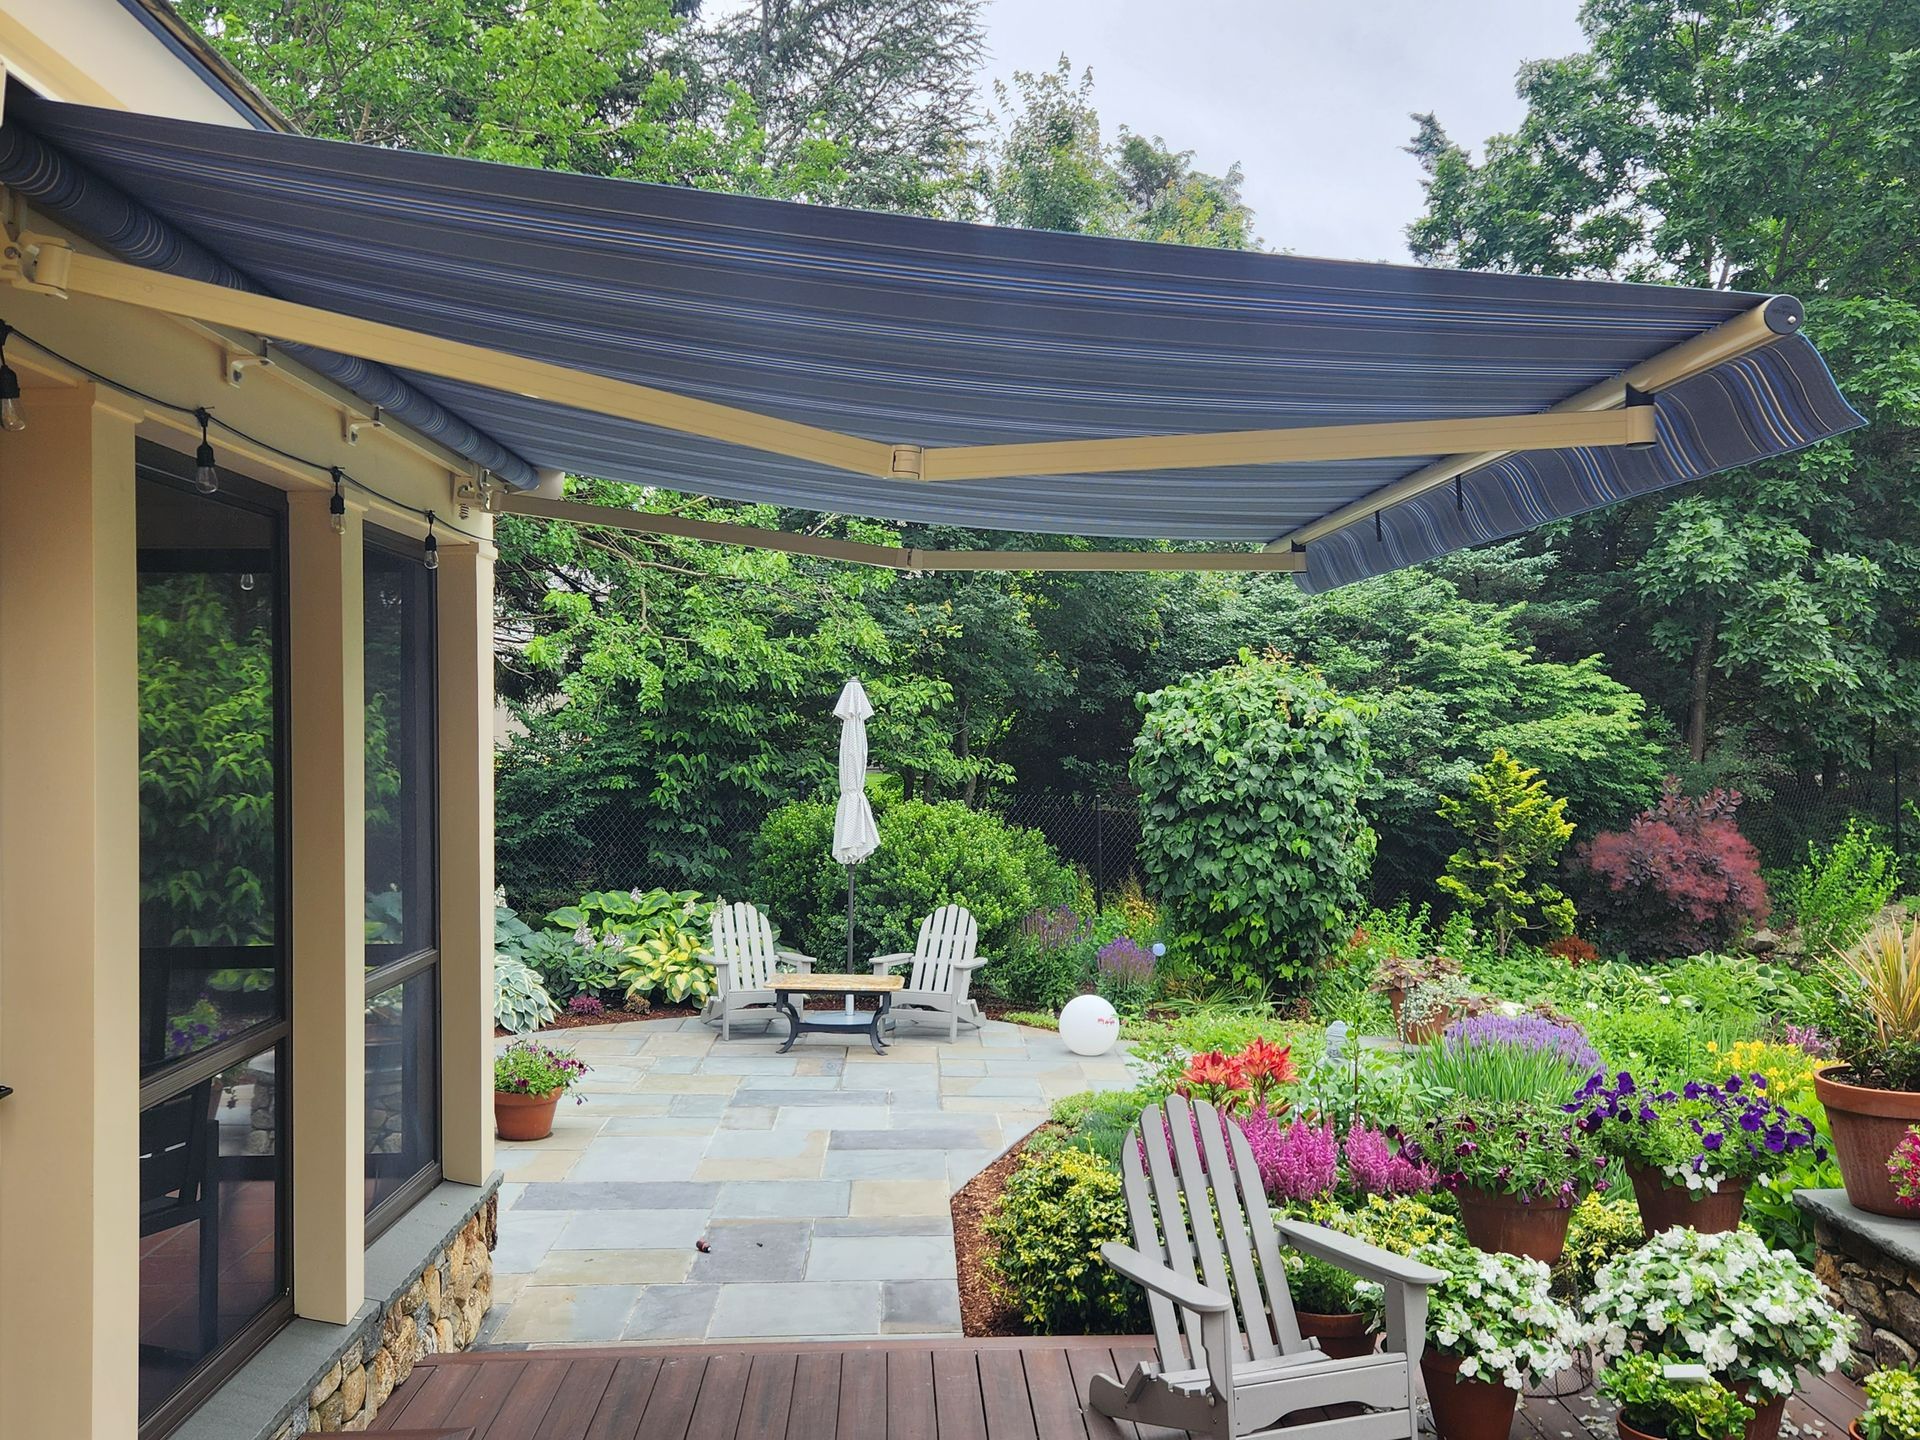 Ocean front durability Retractable Awning Made in America